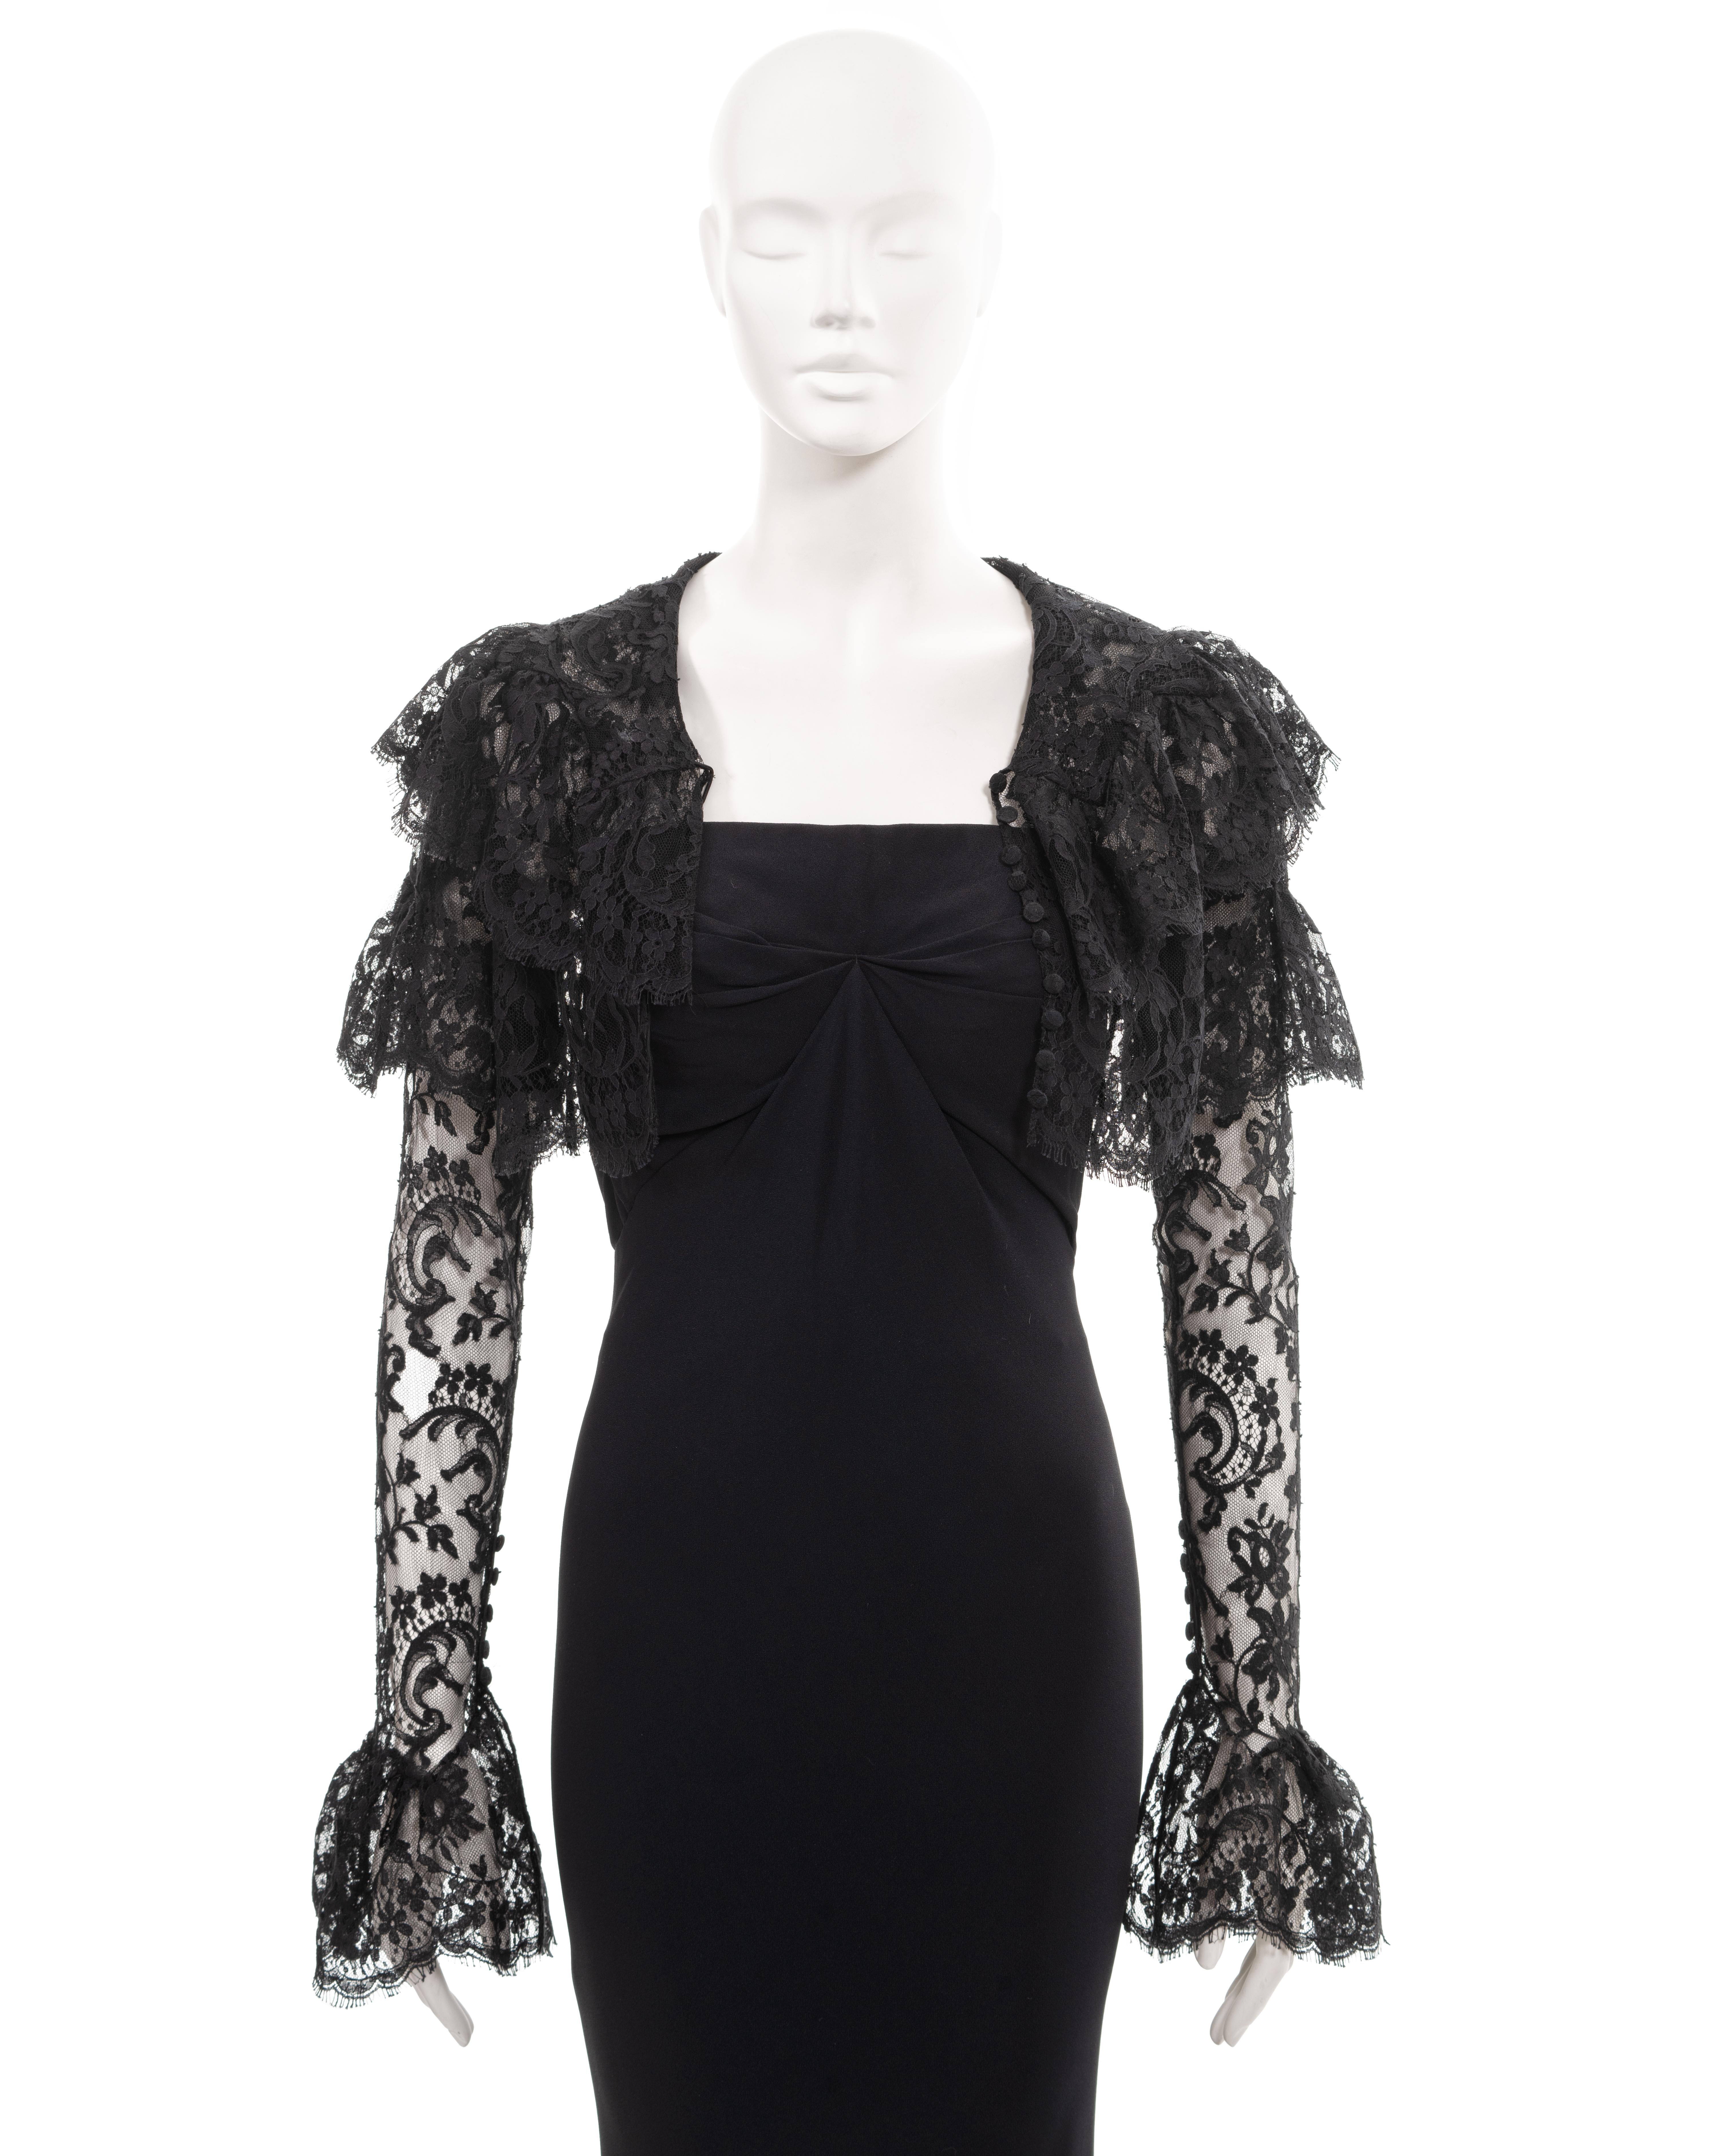 Women's Givenchy by John Galliano black strapless evening dress and lace bolero, ss 1997 For Sale